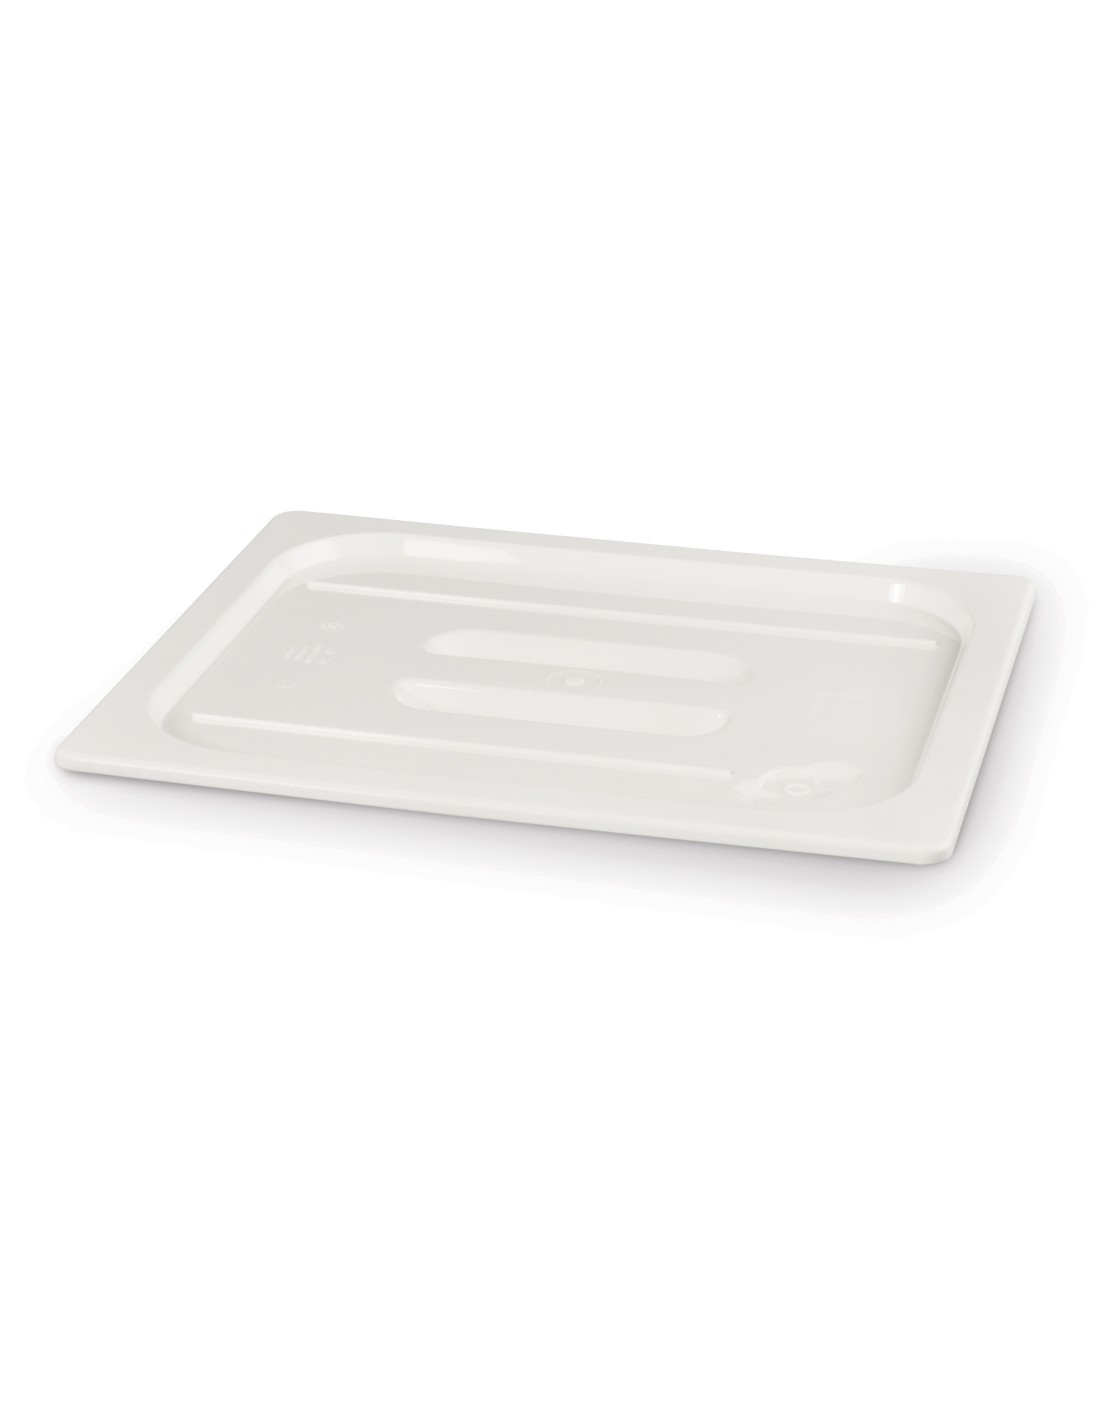 Lid for GN 1/4 trays - In white polycarbonate - mm 265 x 162